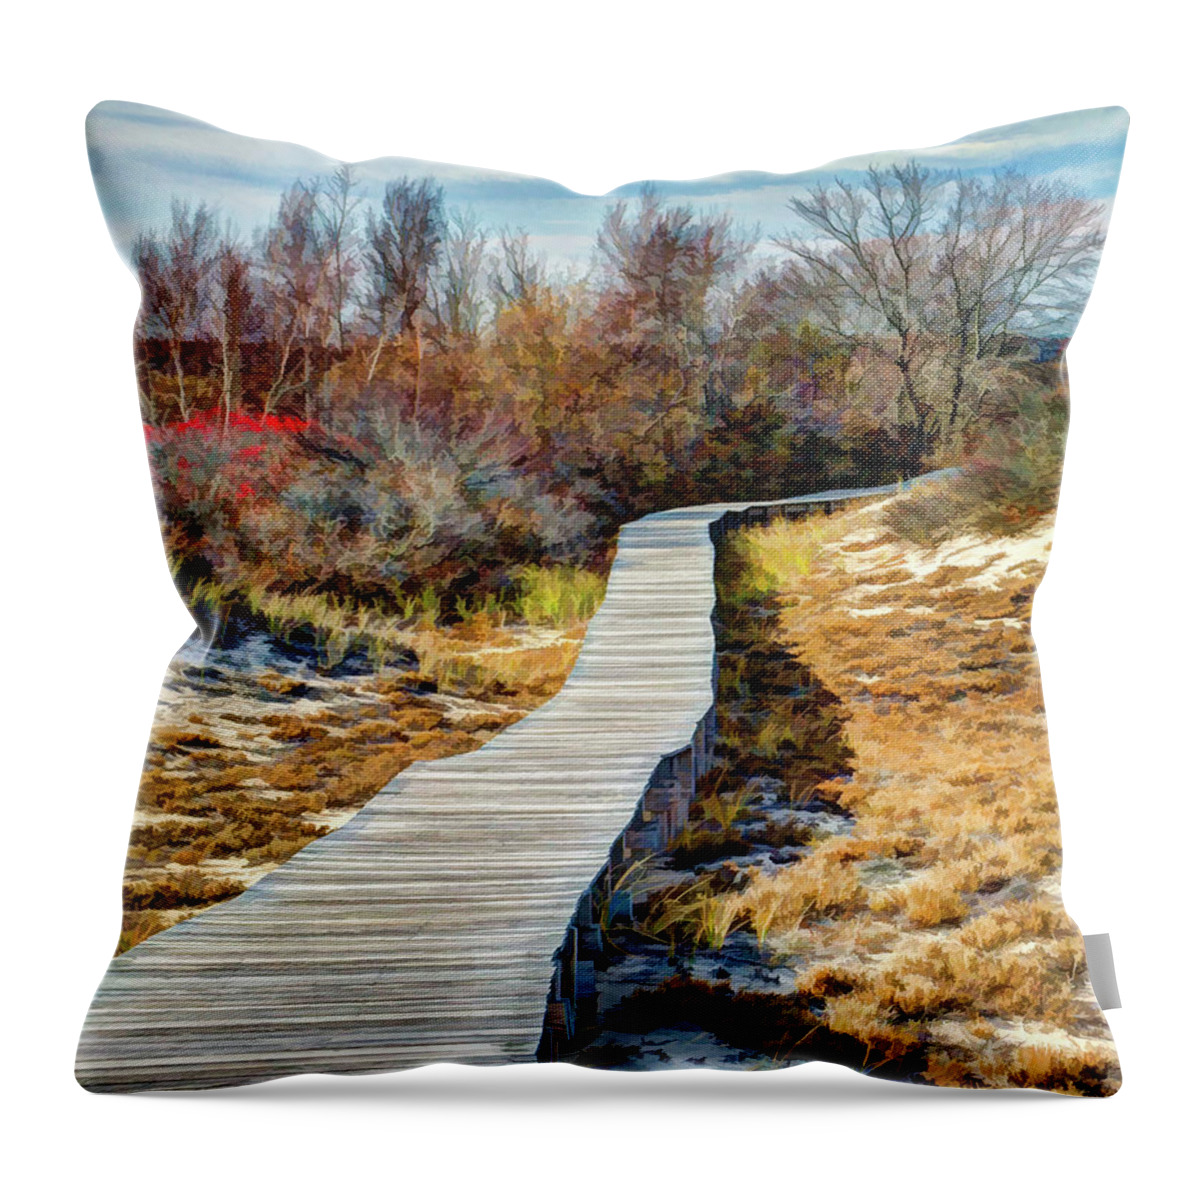 New England Throw Pillow featuring the photograph Parker River NWR Boardwalk by David Thompsen